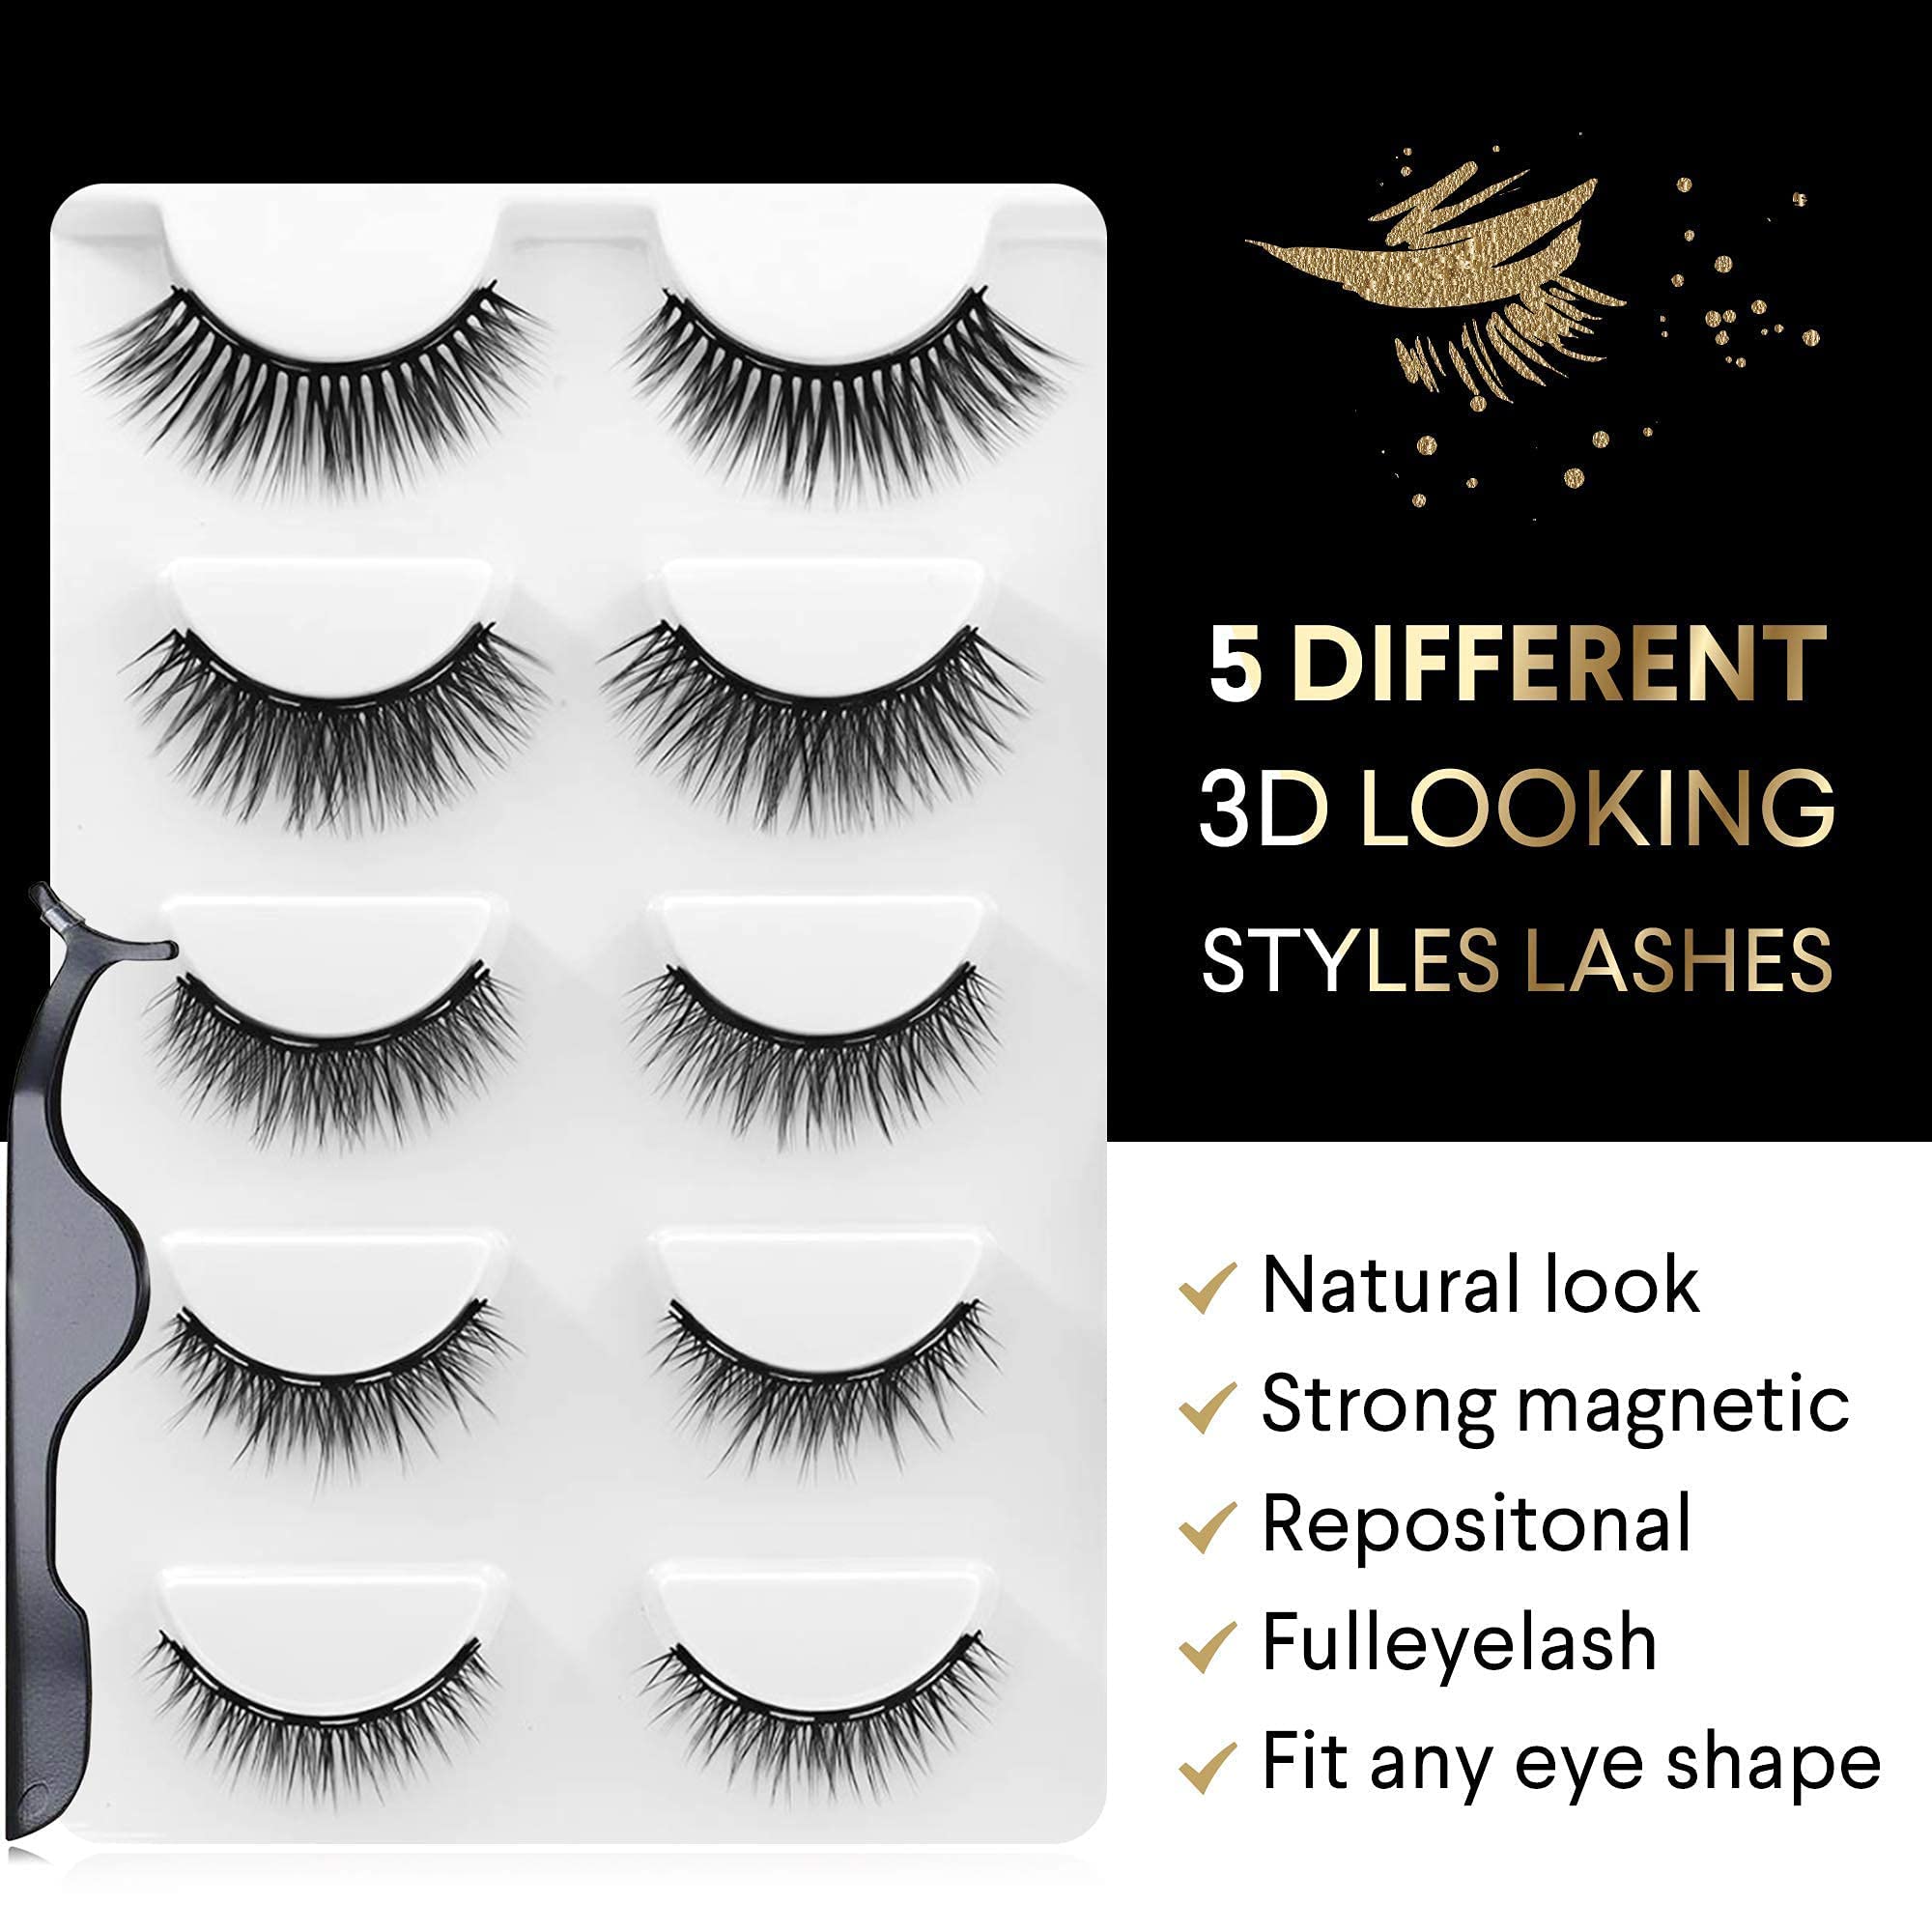 easbeauty 2020 Upgraded Magnetic Eyeliner and Eyelashes Kit, Magnetic Eyelashes with Eyeliner, False Lashes 5 Pairs with Tweezers, Easy to Wear